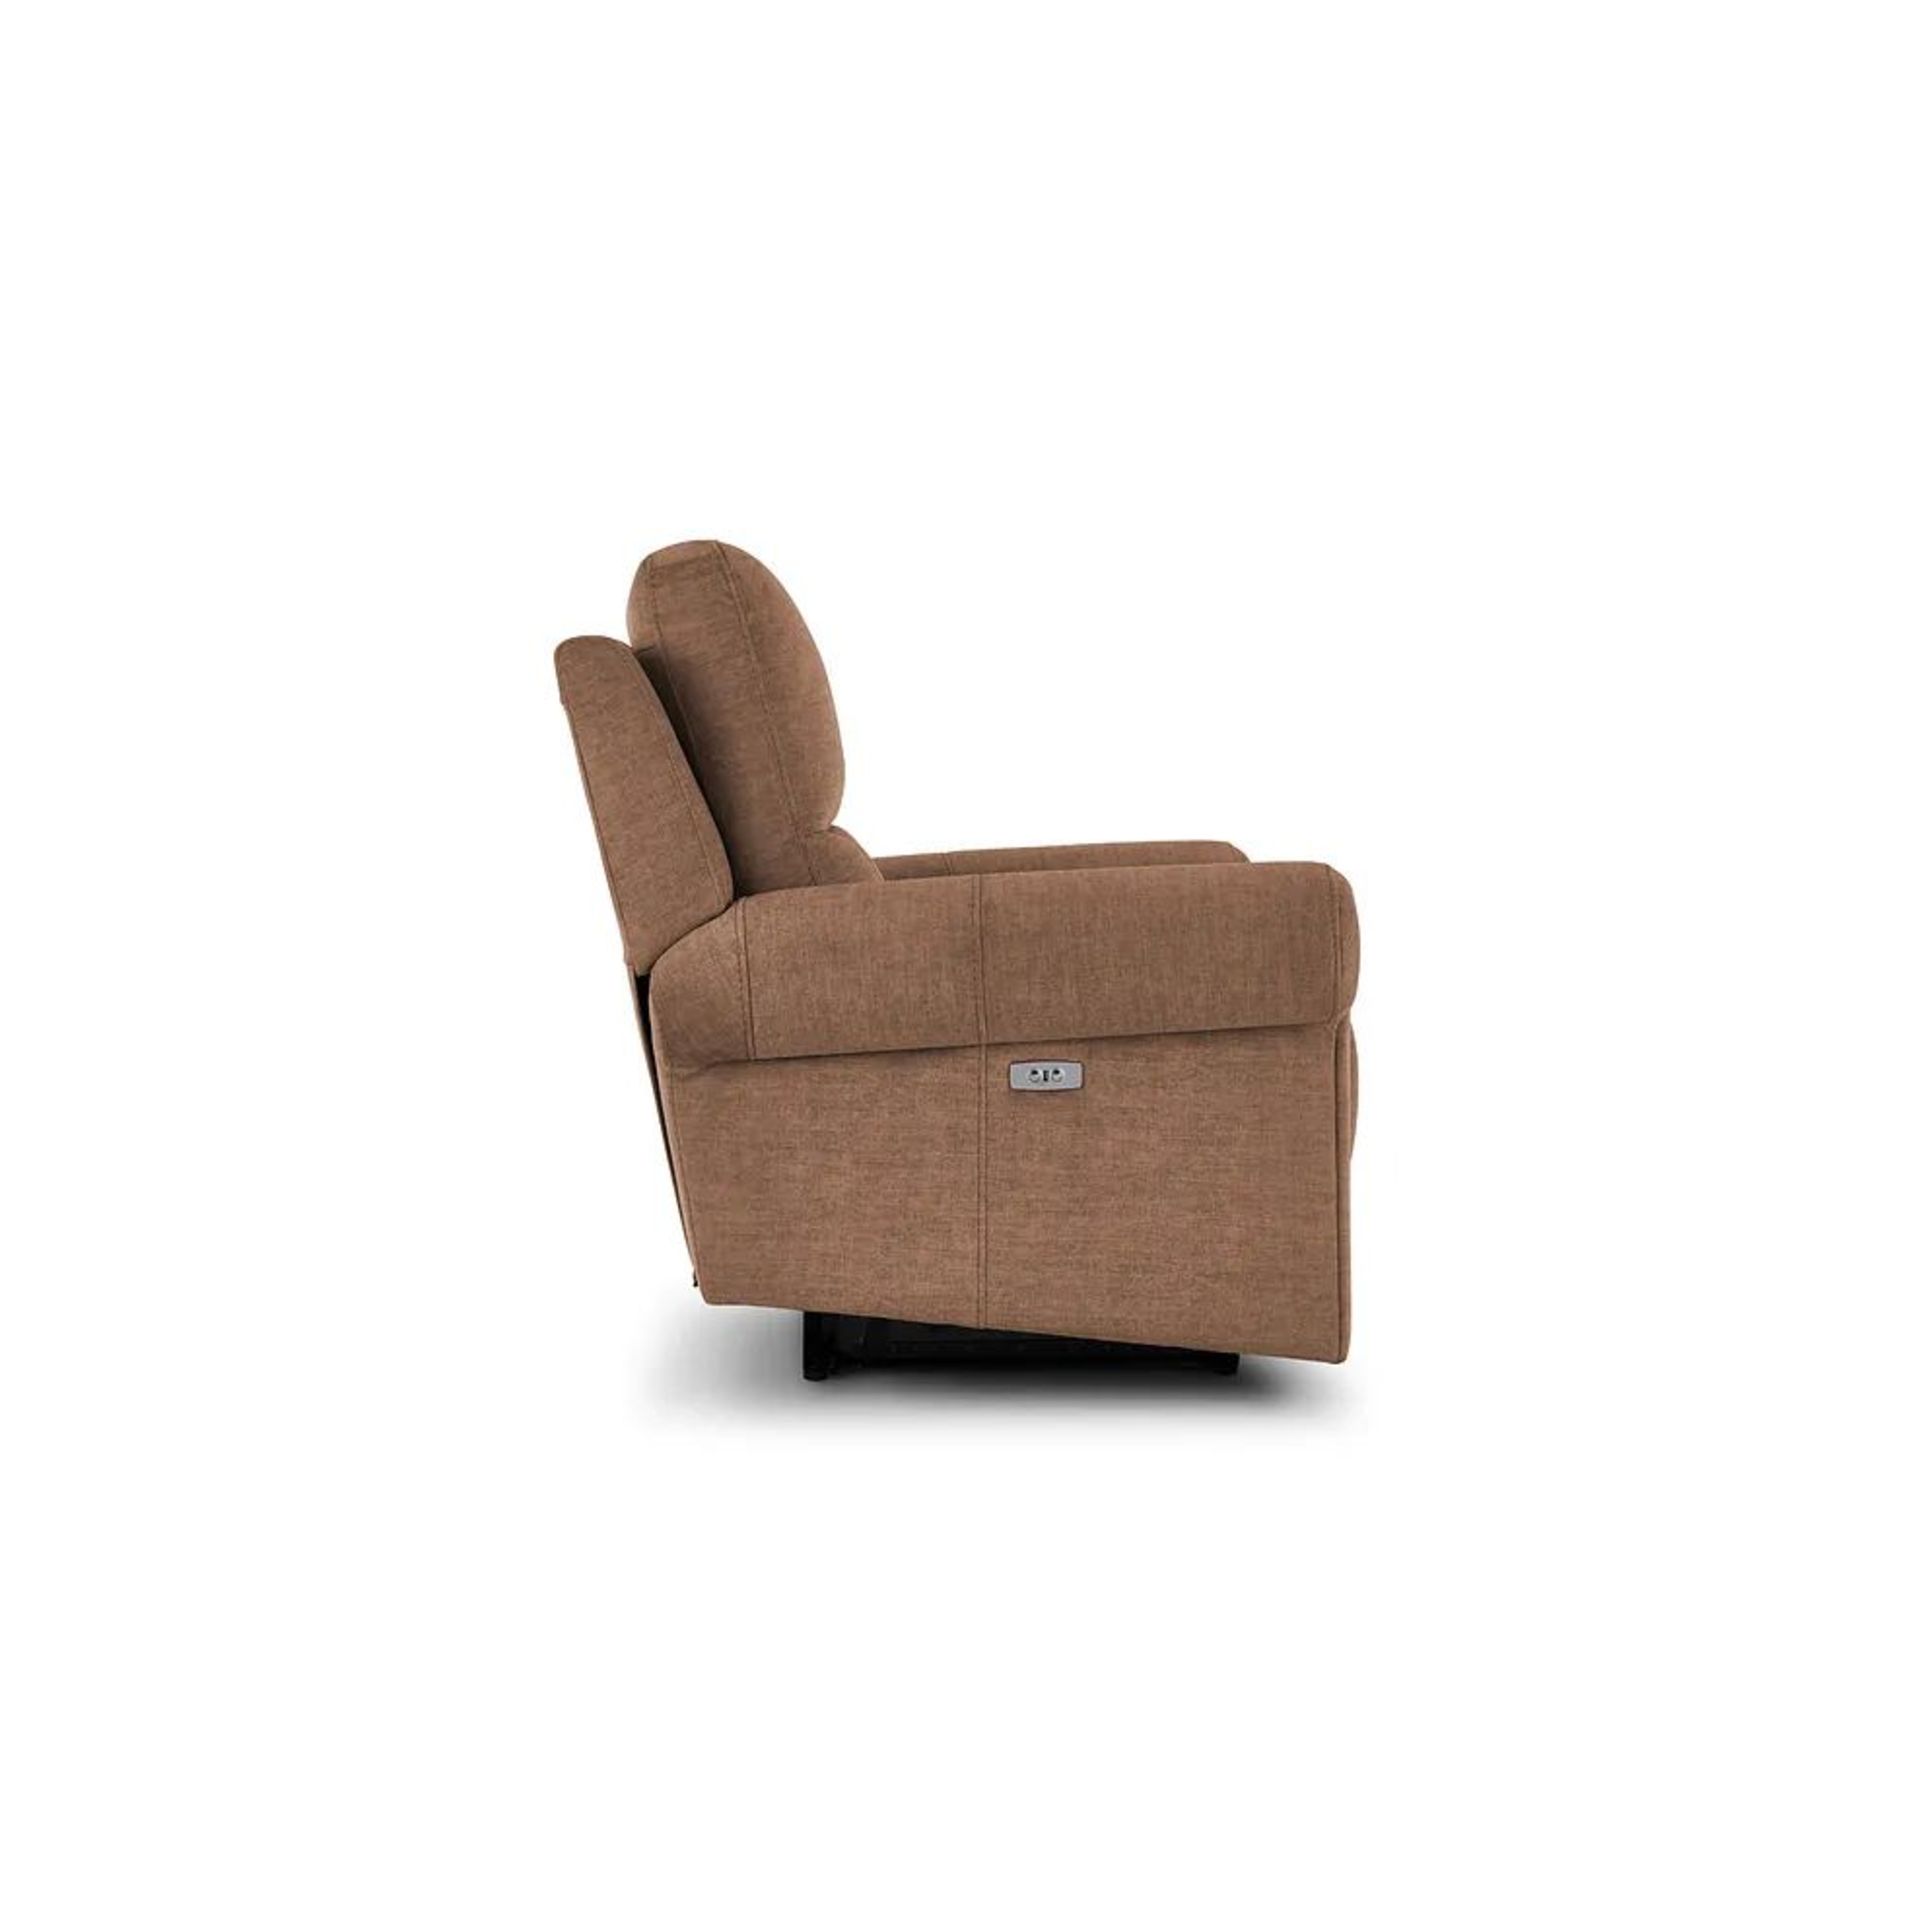 BRAND NEW COLORADO Electric Recliner Armchair - PLUSH BROWN FABRIC. RRP £799. Shown here in Plush - Bild 6 aus 11